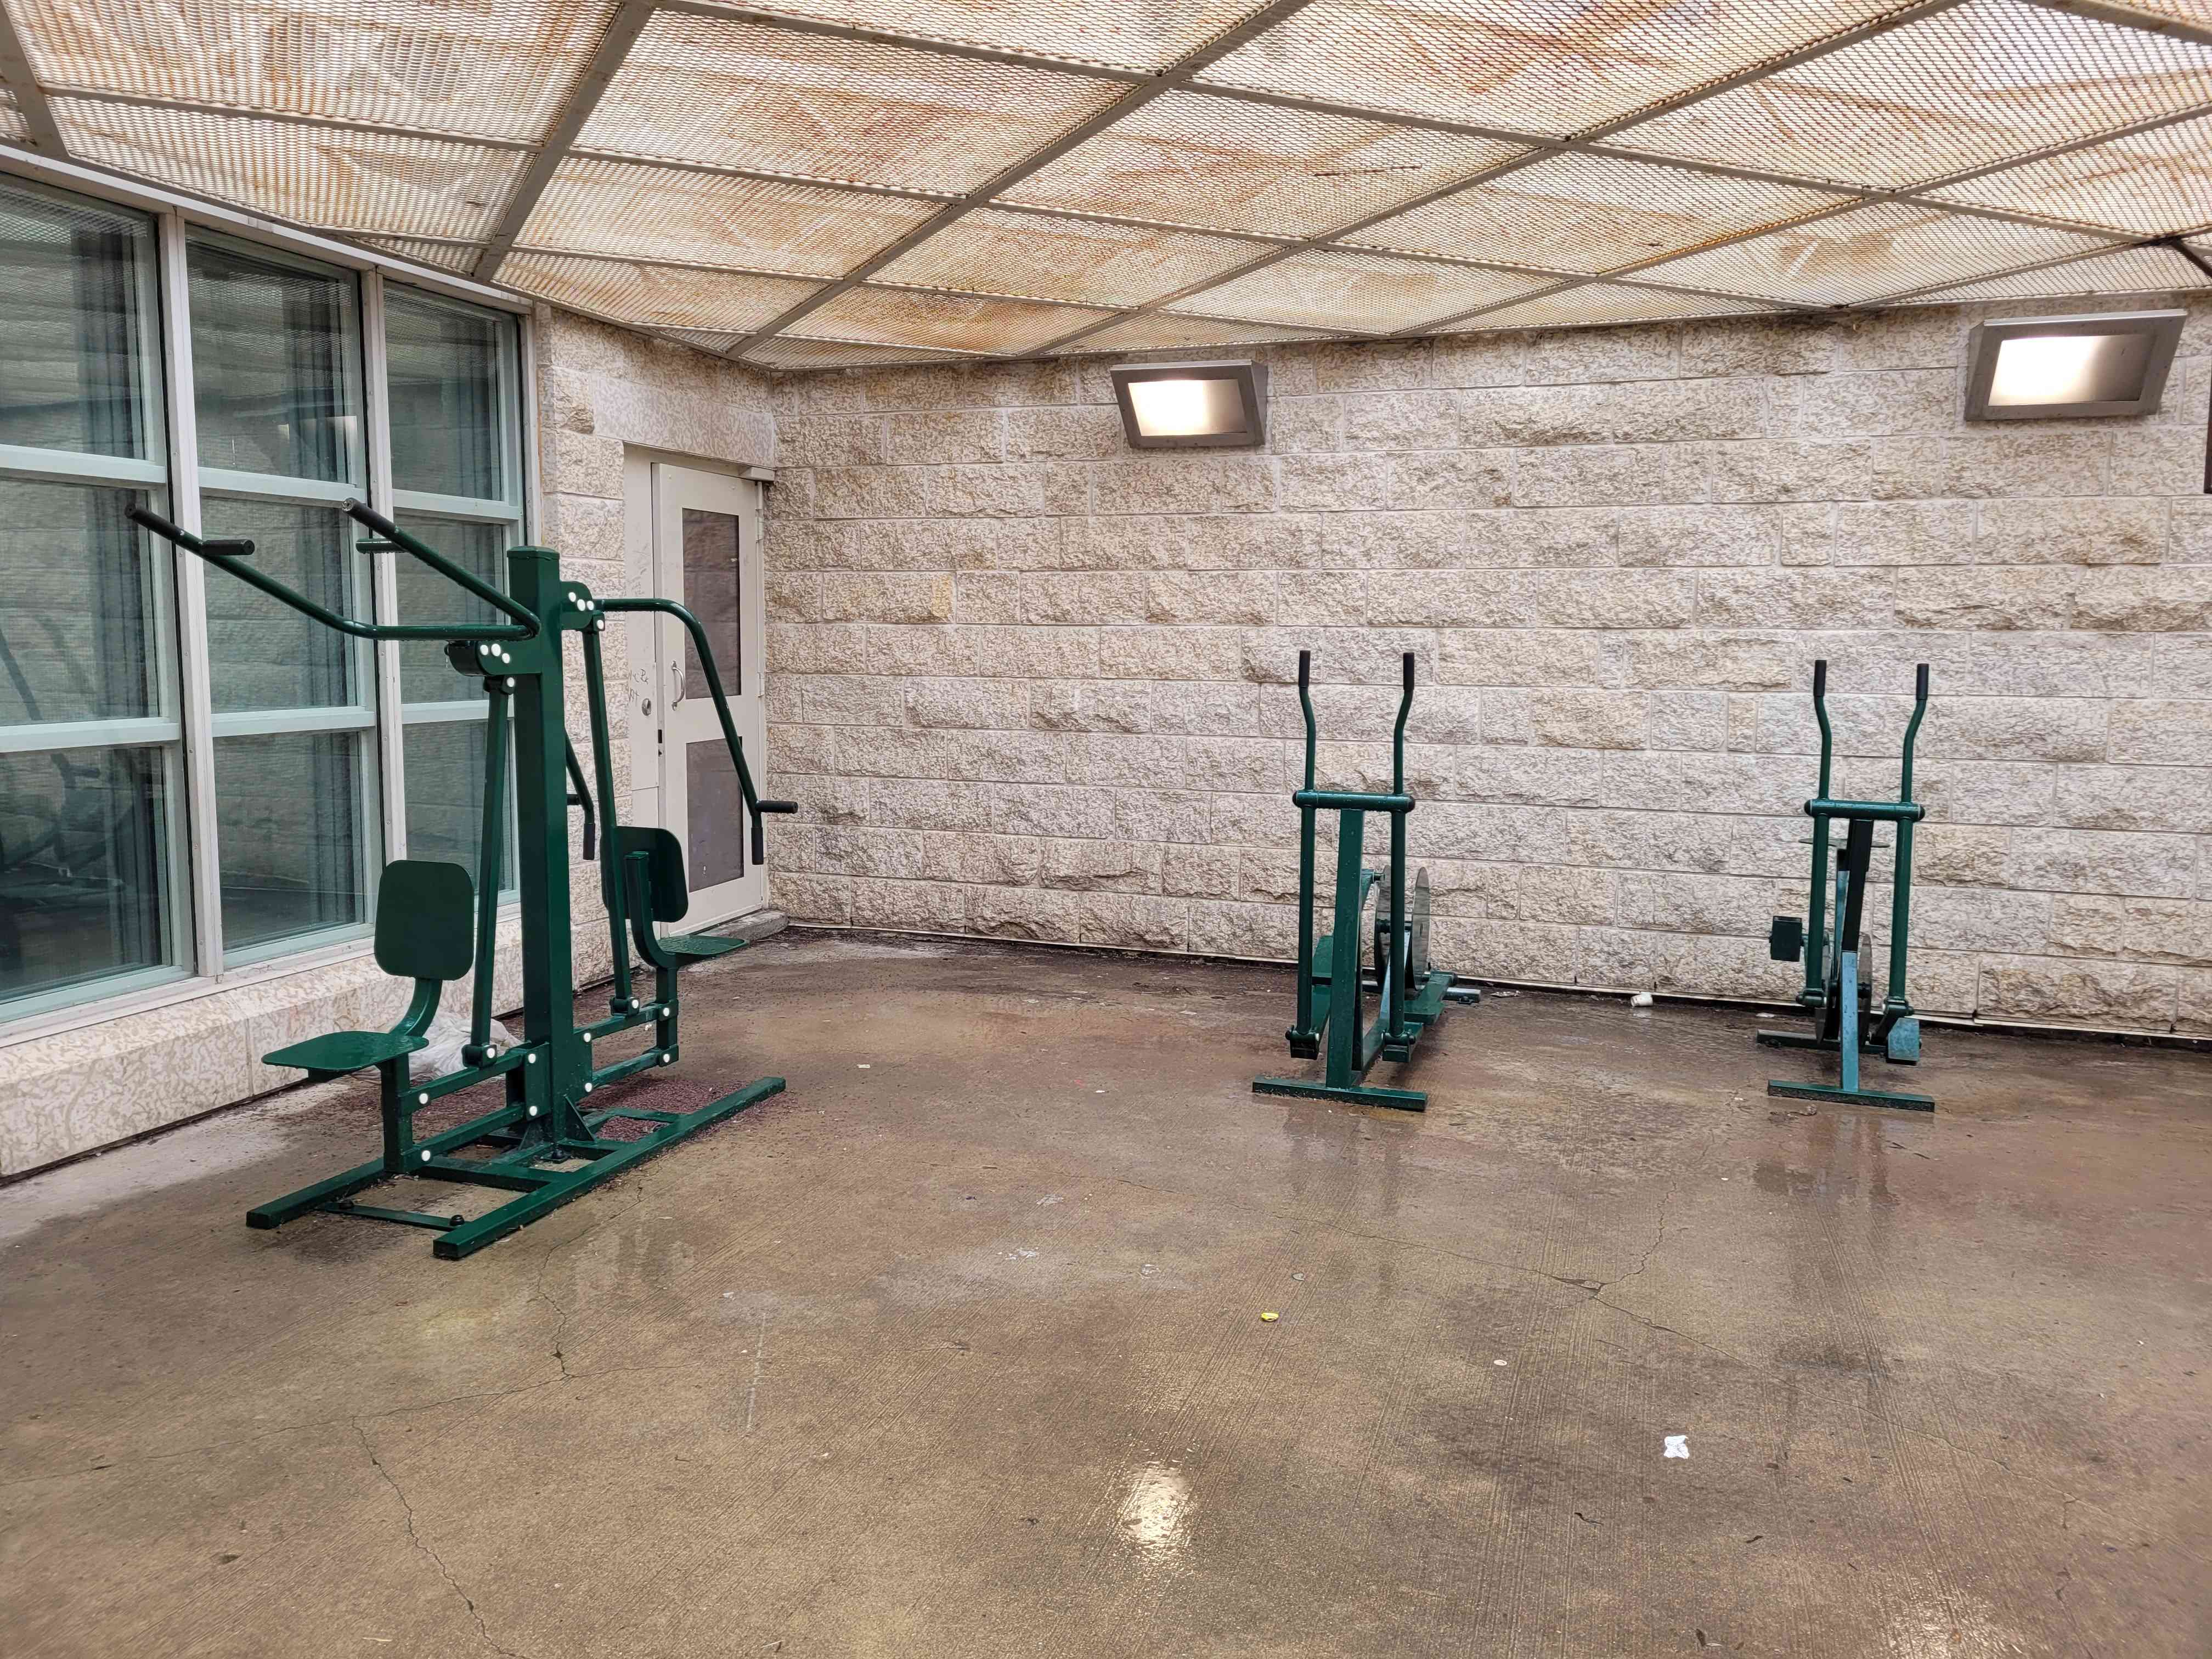 Photo of the SIU exercise equipment in the yard at Stony Mountain Institution.